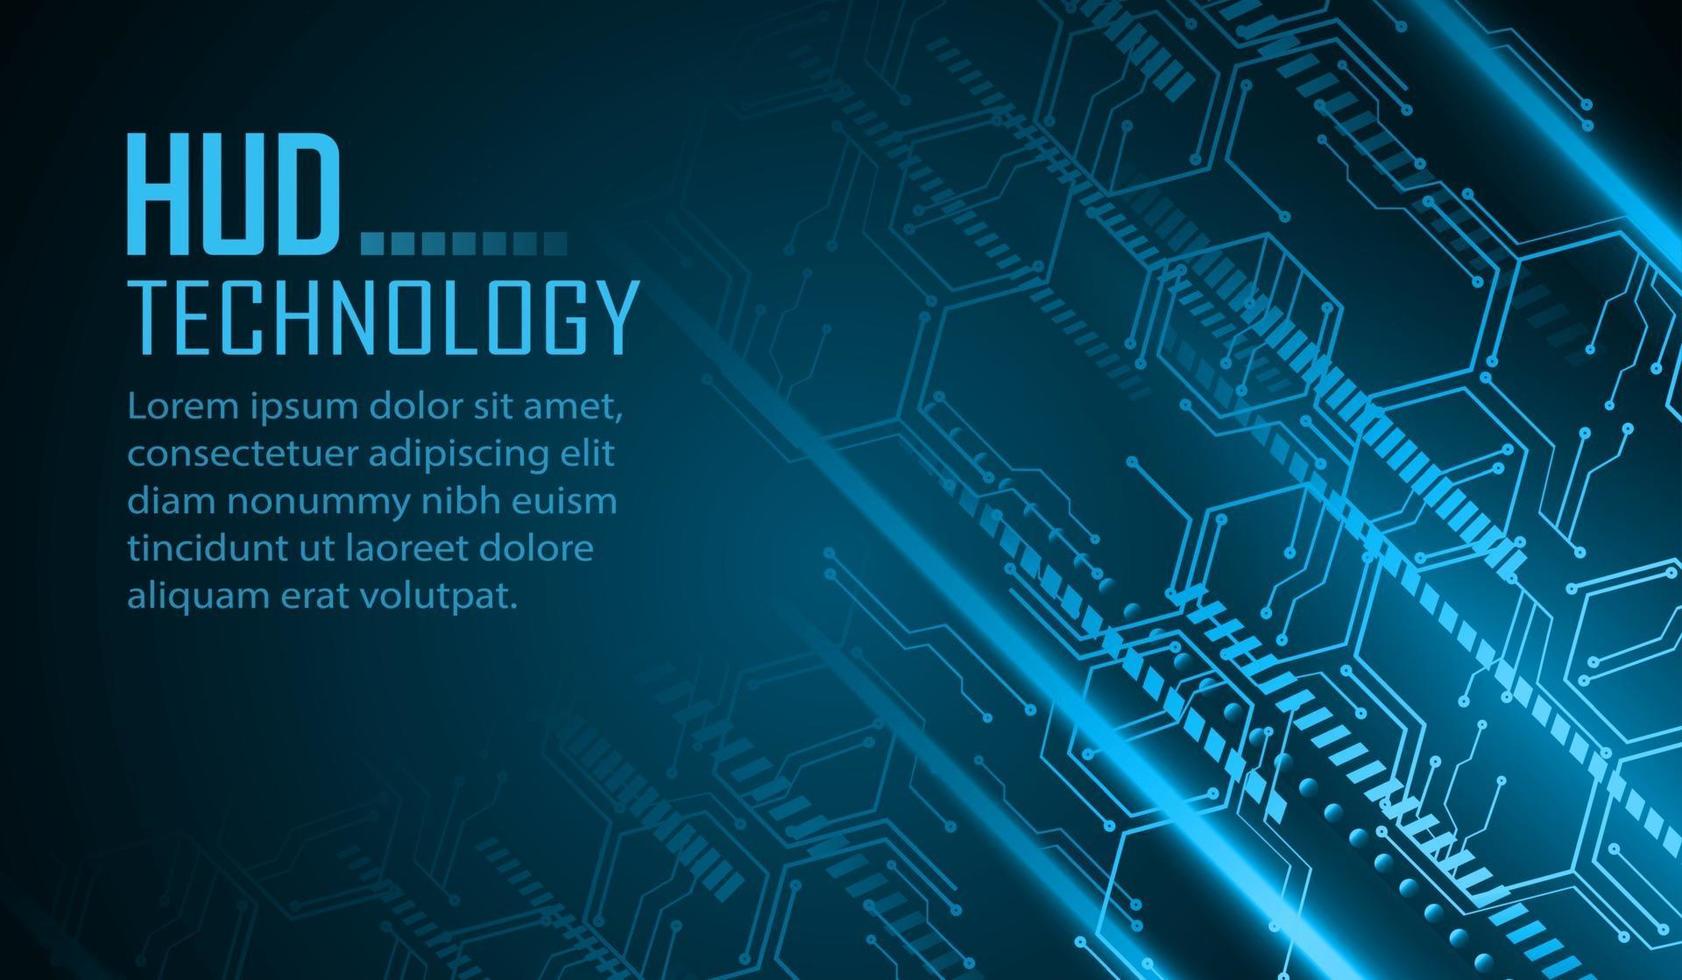 cyber circuit future technology concept background, text vector